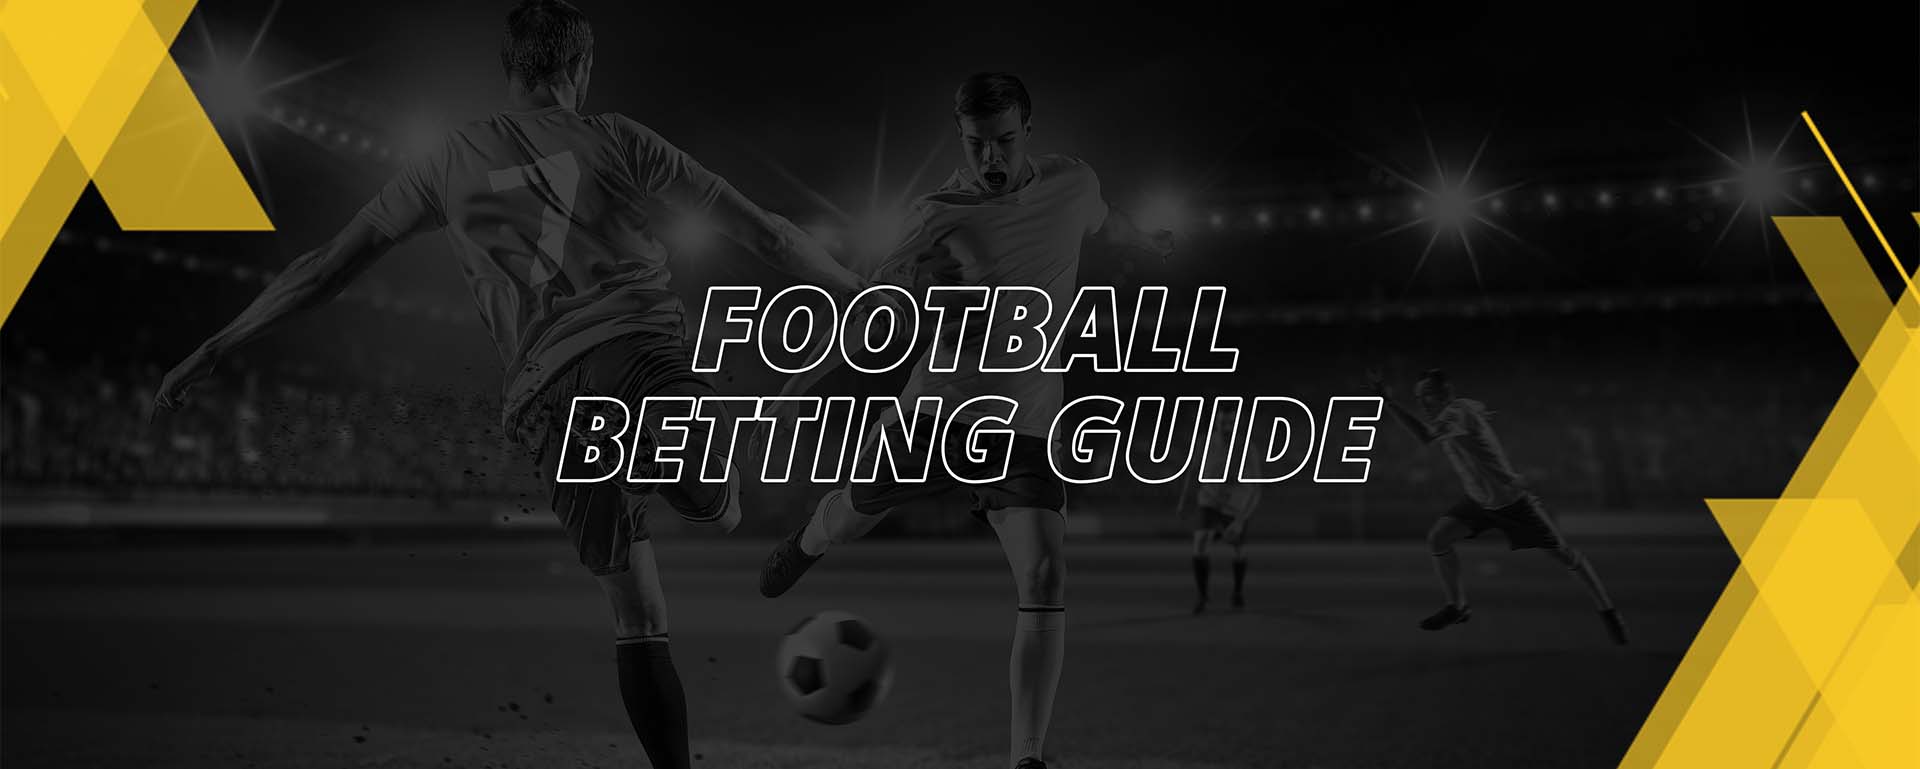 FOOTBALL BETTING GUIDE